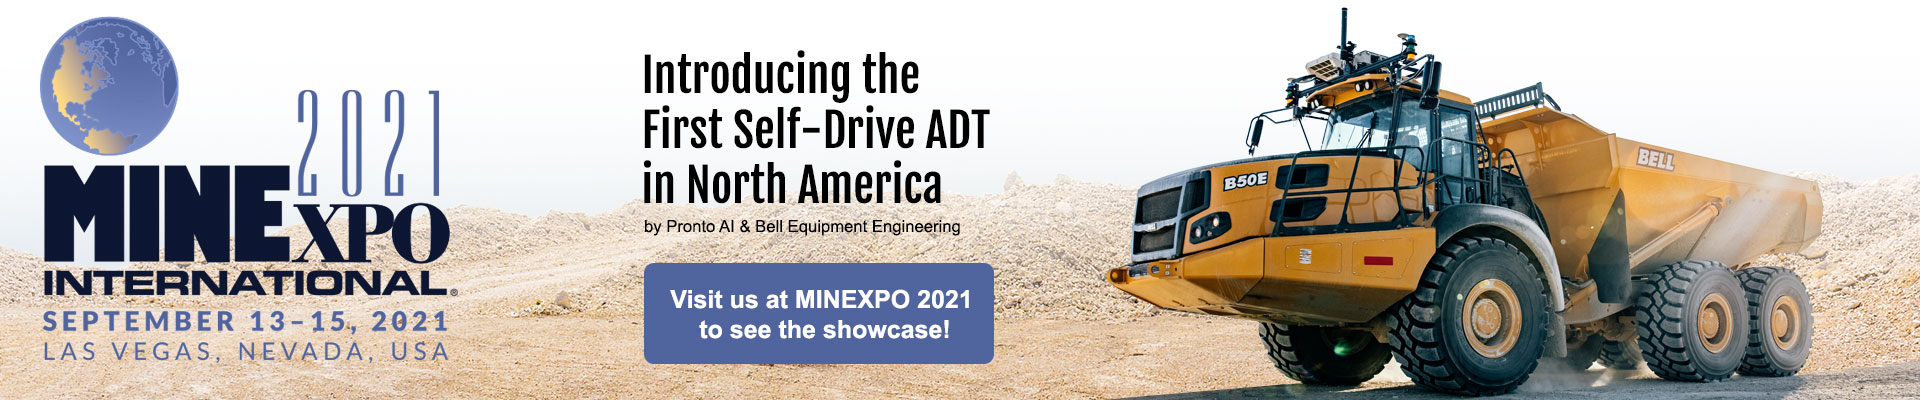 BTA & Pronto AI Introduce the First Autonomous ADT in North America at MinExpo 2021